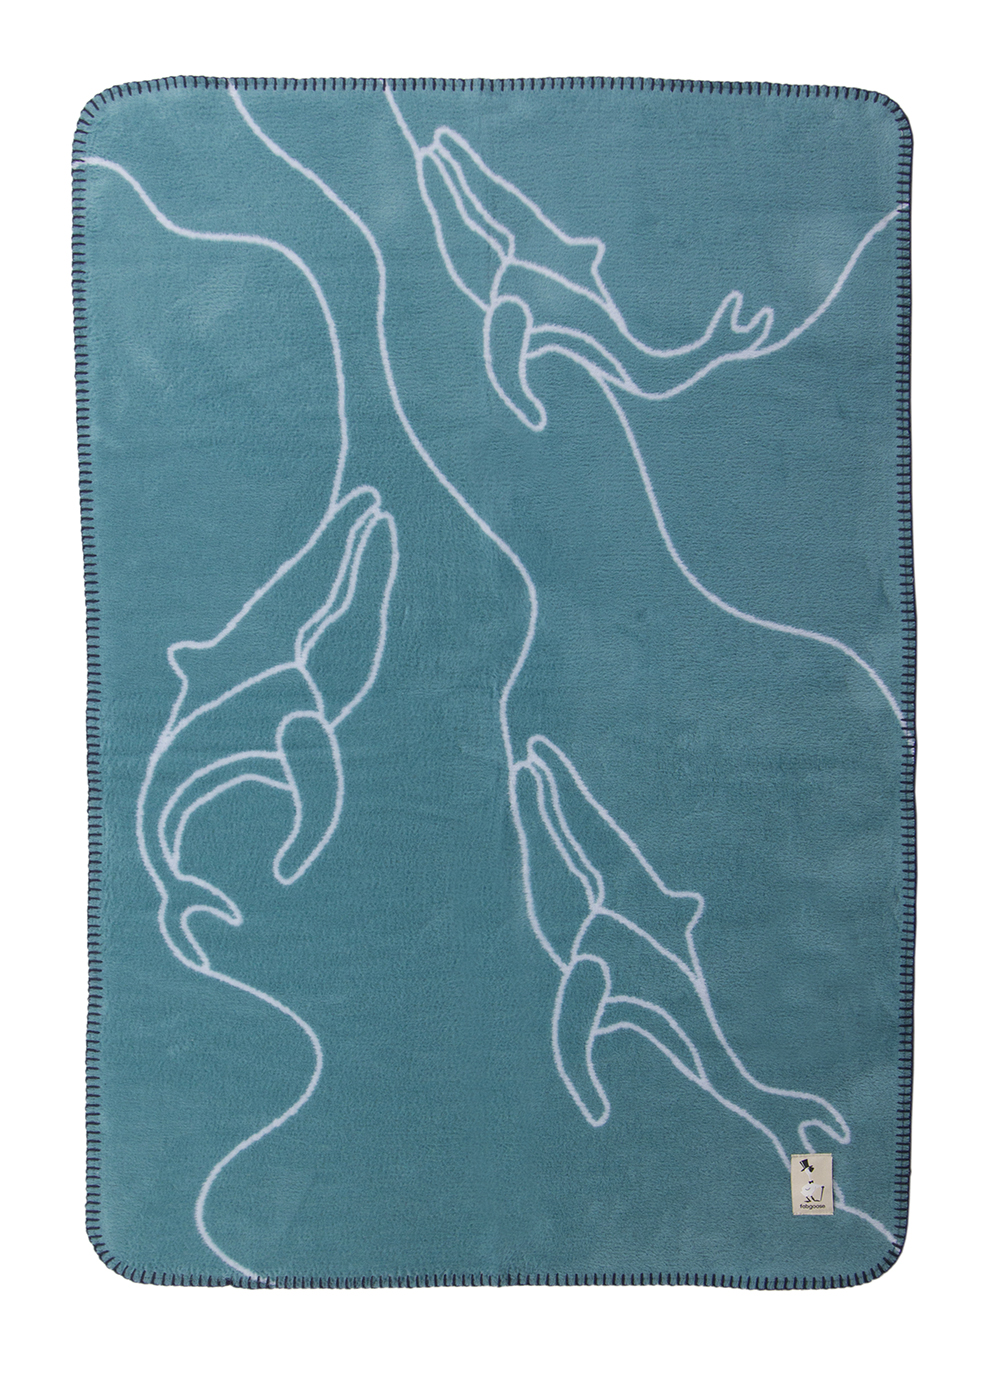 super soft organic cotton baby blanket with whales design